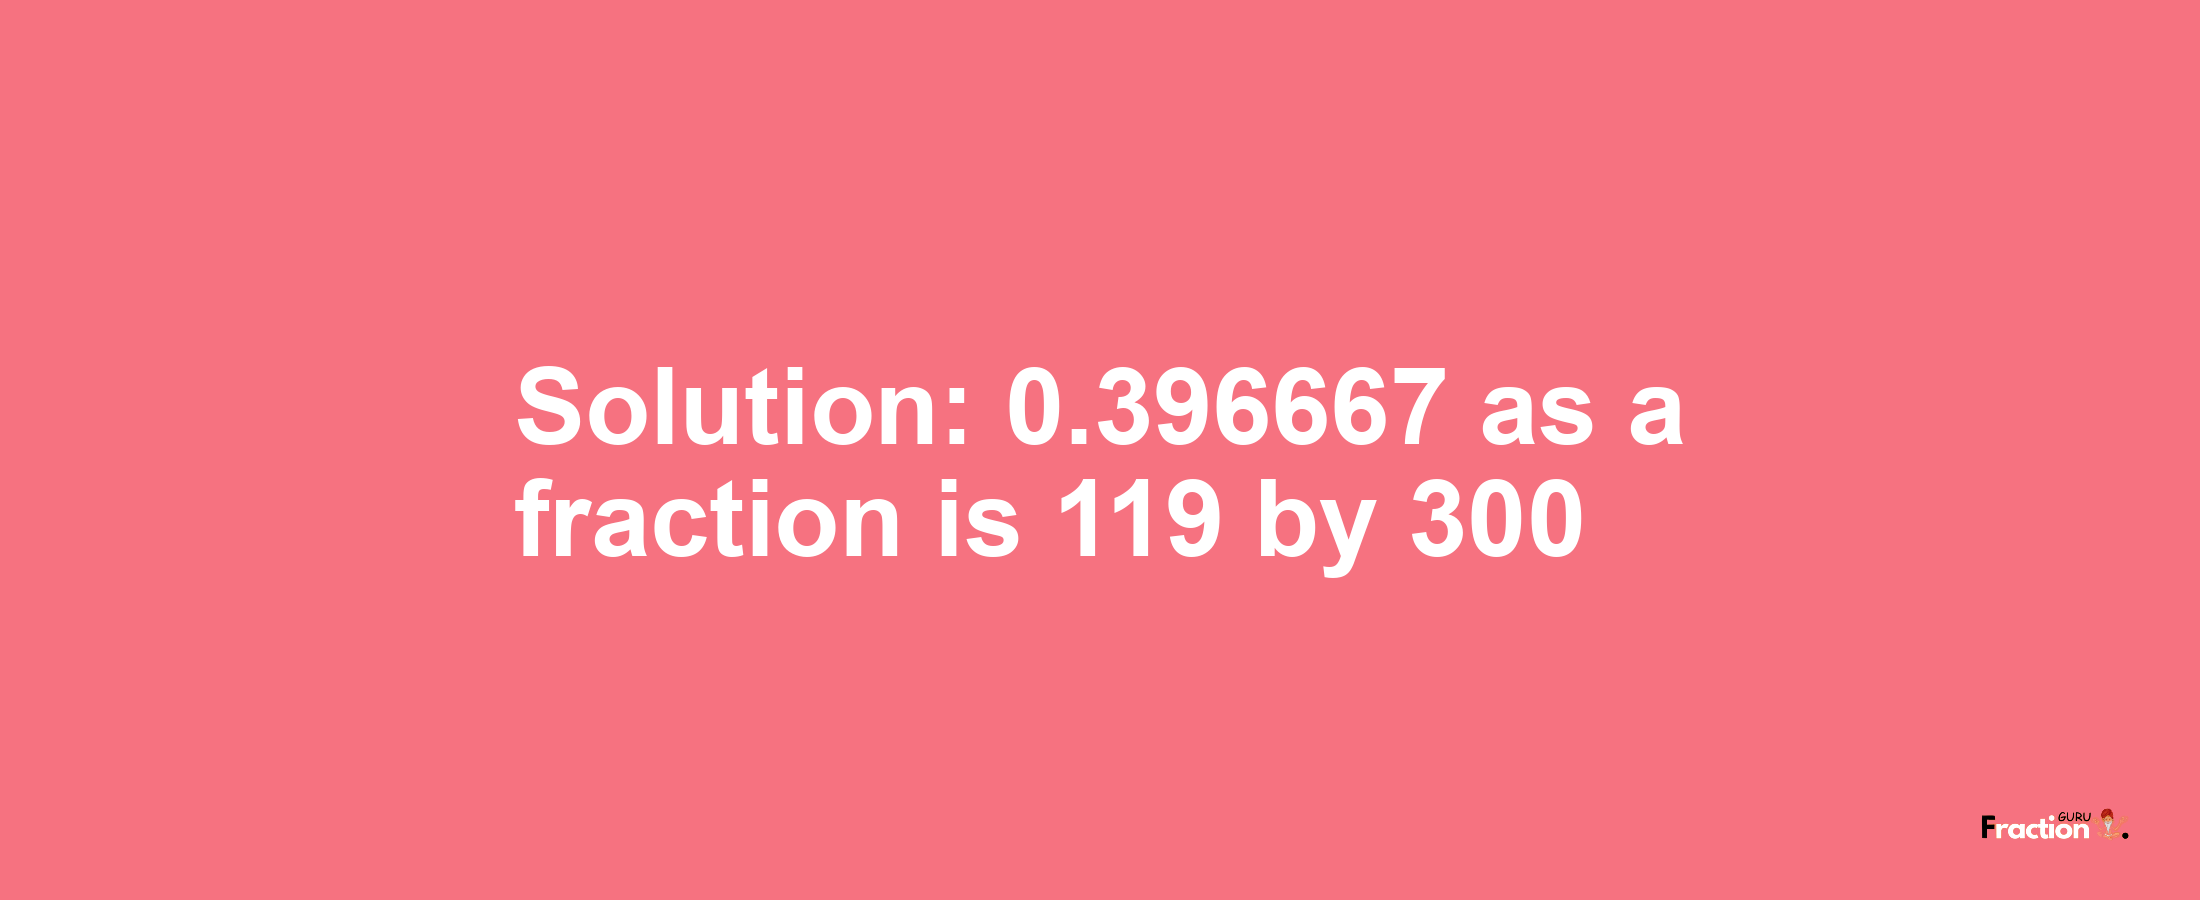 Solution:0.396667 as a fraction is 119/300